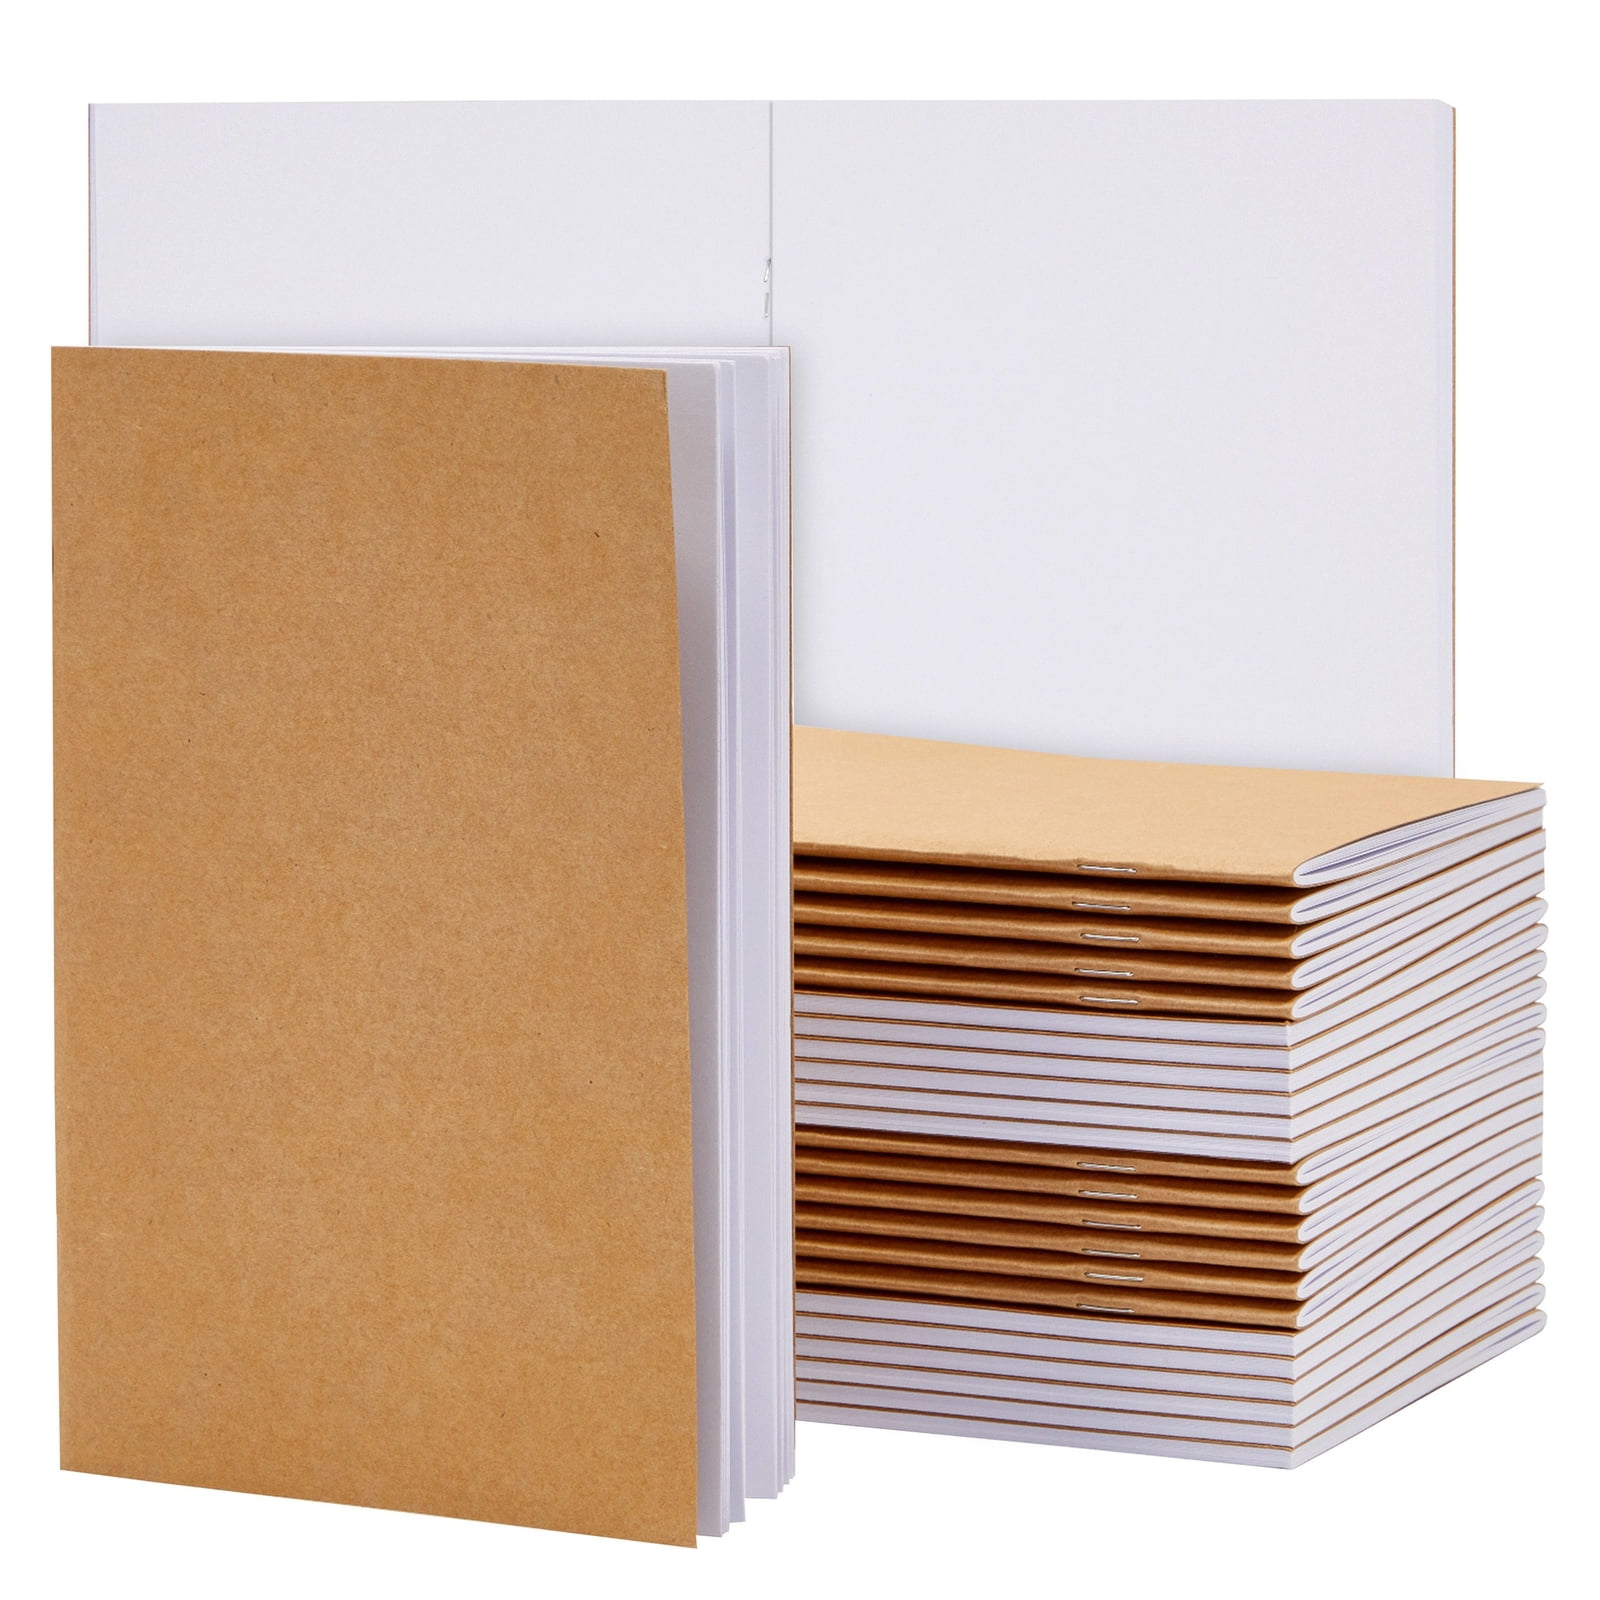 48 Pages 24 Sheets,4.25 x 5.5 Inch 100 Pack Mini Kraft Paper Notebook Unlined Pocket Kraft Notebook Blank Sketchbooks Travel Journal Notepad for Kids Classroom Students School Writing Black 